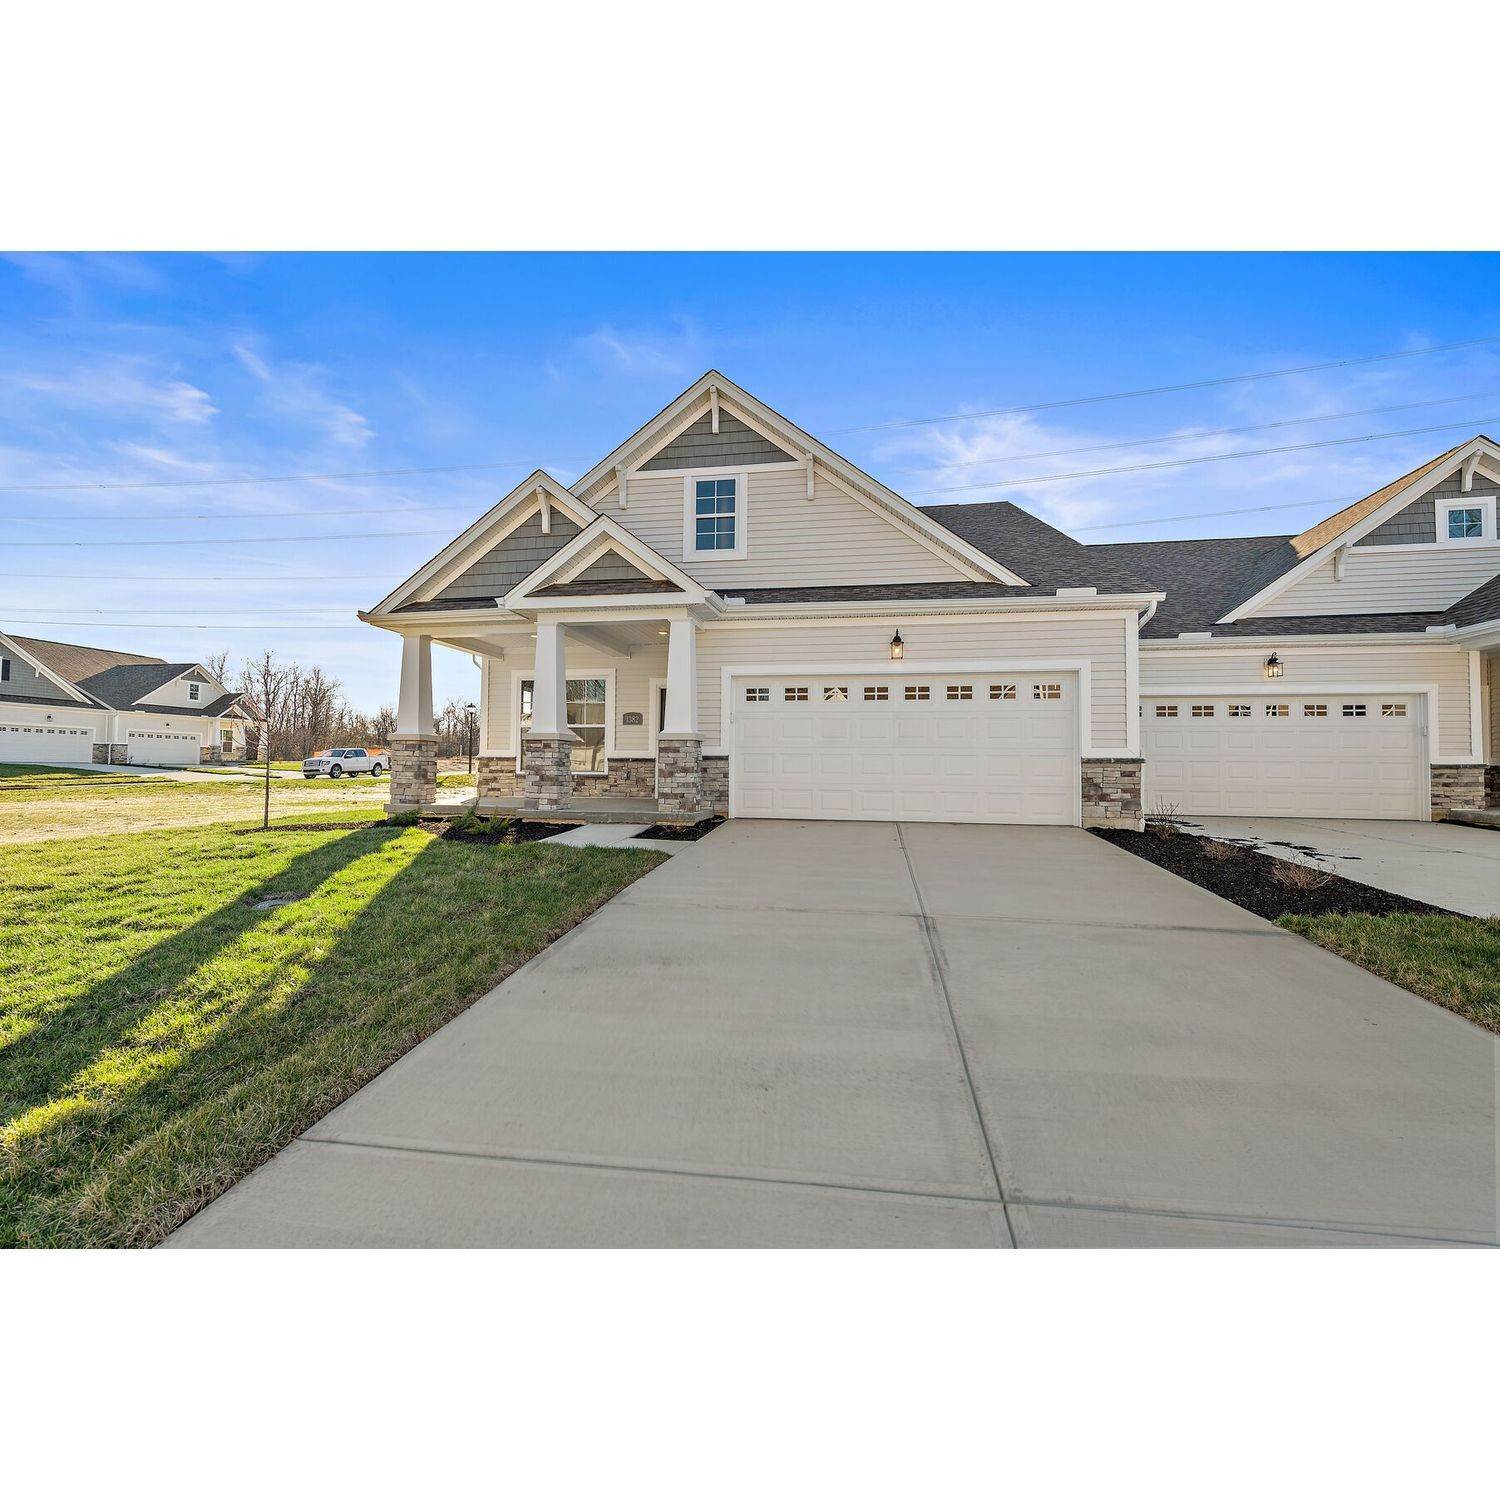 Single Family for Sale at Batavia, OH 45103